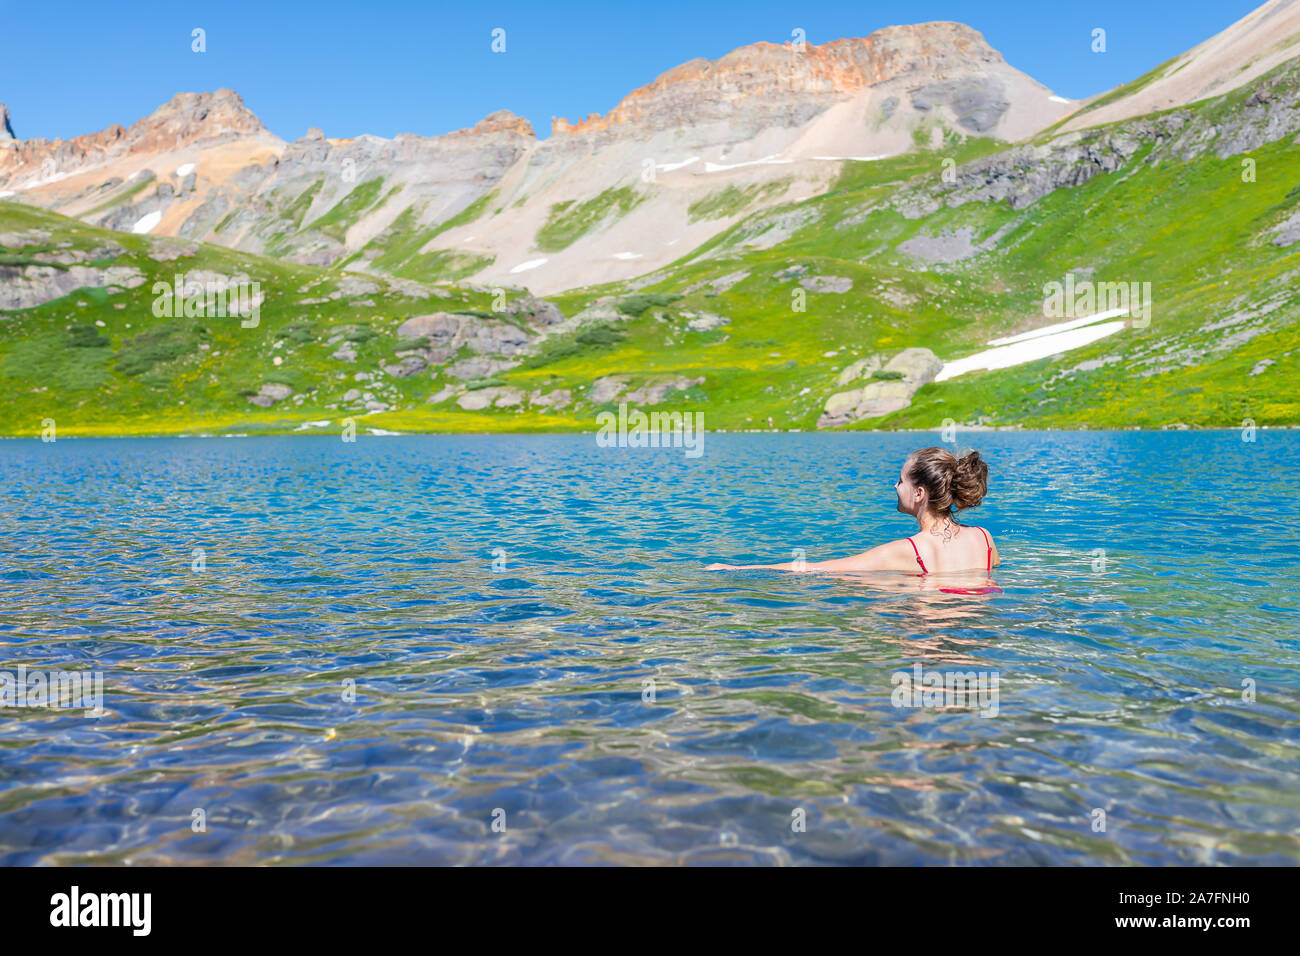 Young woman girl swimming cold colorful water of Ice Lake on famous trail in Silverton, Colorado in San Juan Mountains in summer Stock Photo